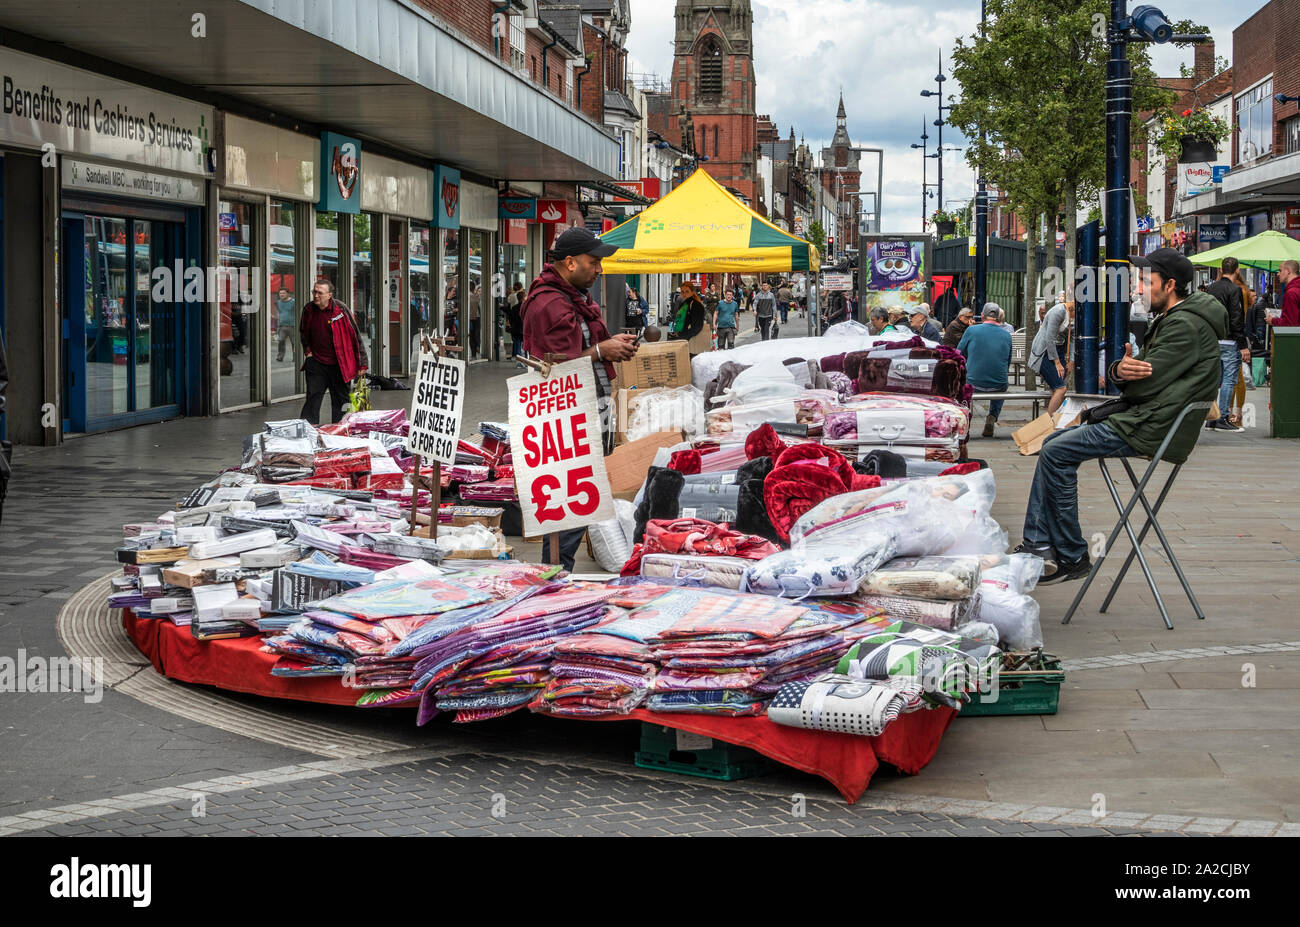 Local outdoor market stall, High Street, West Bromwich, West